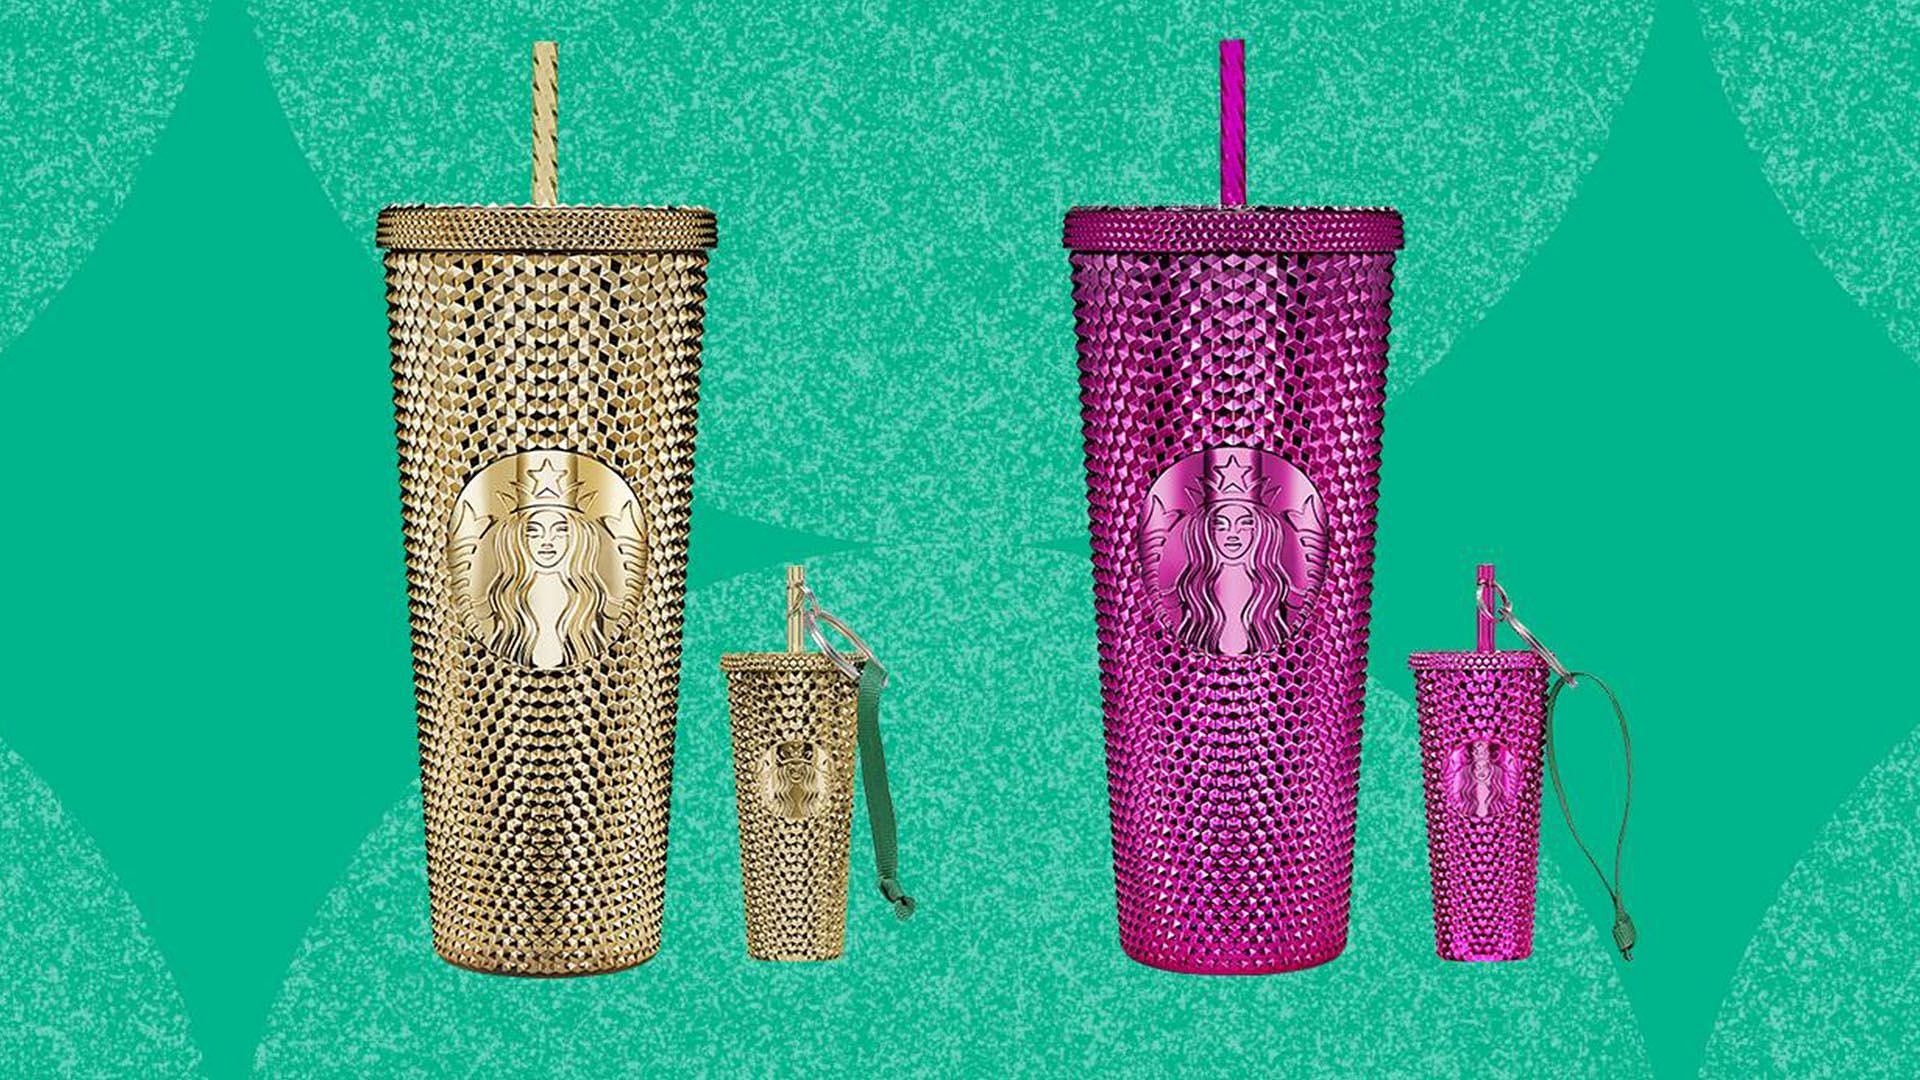 Bling Cold Cups in gold and sangria hues. (image via Starbucks)